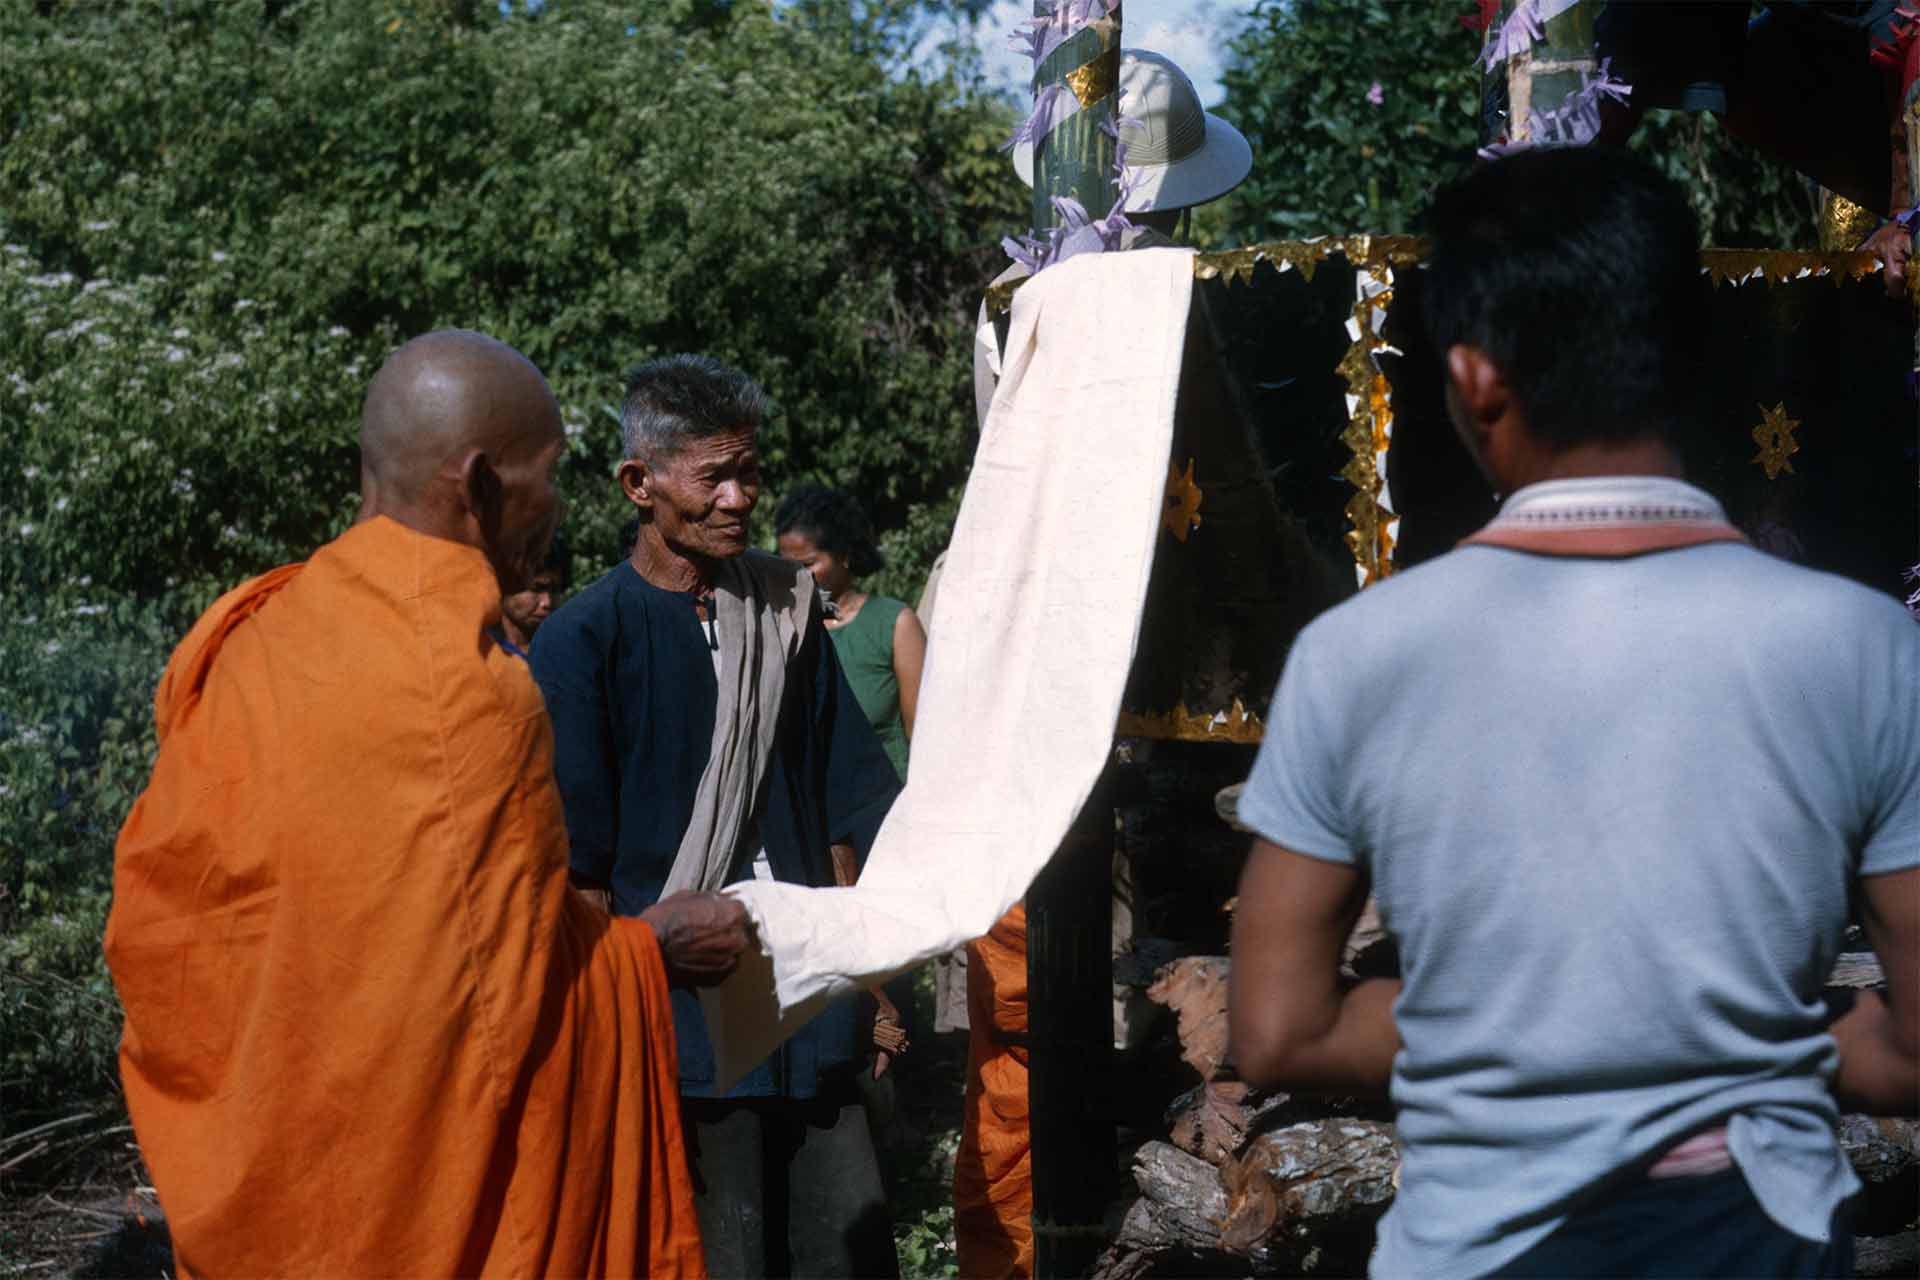 monk holding cloth attached to casket, people surround funeral pyre